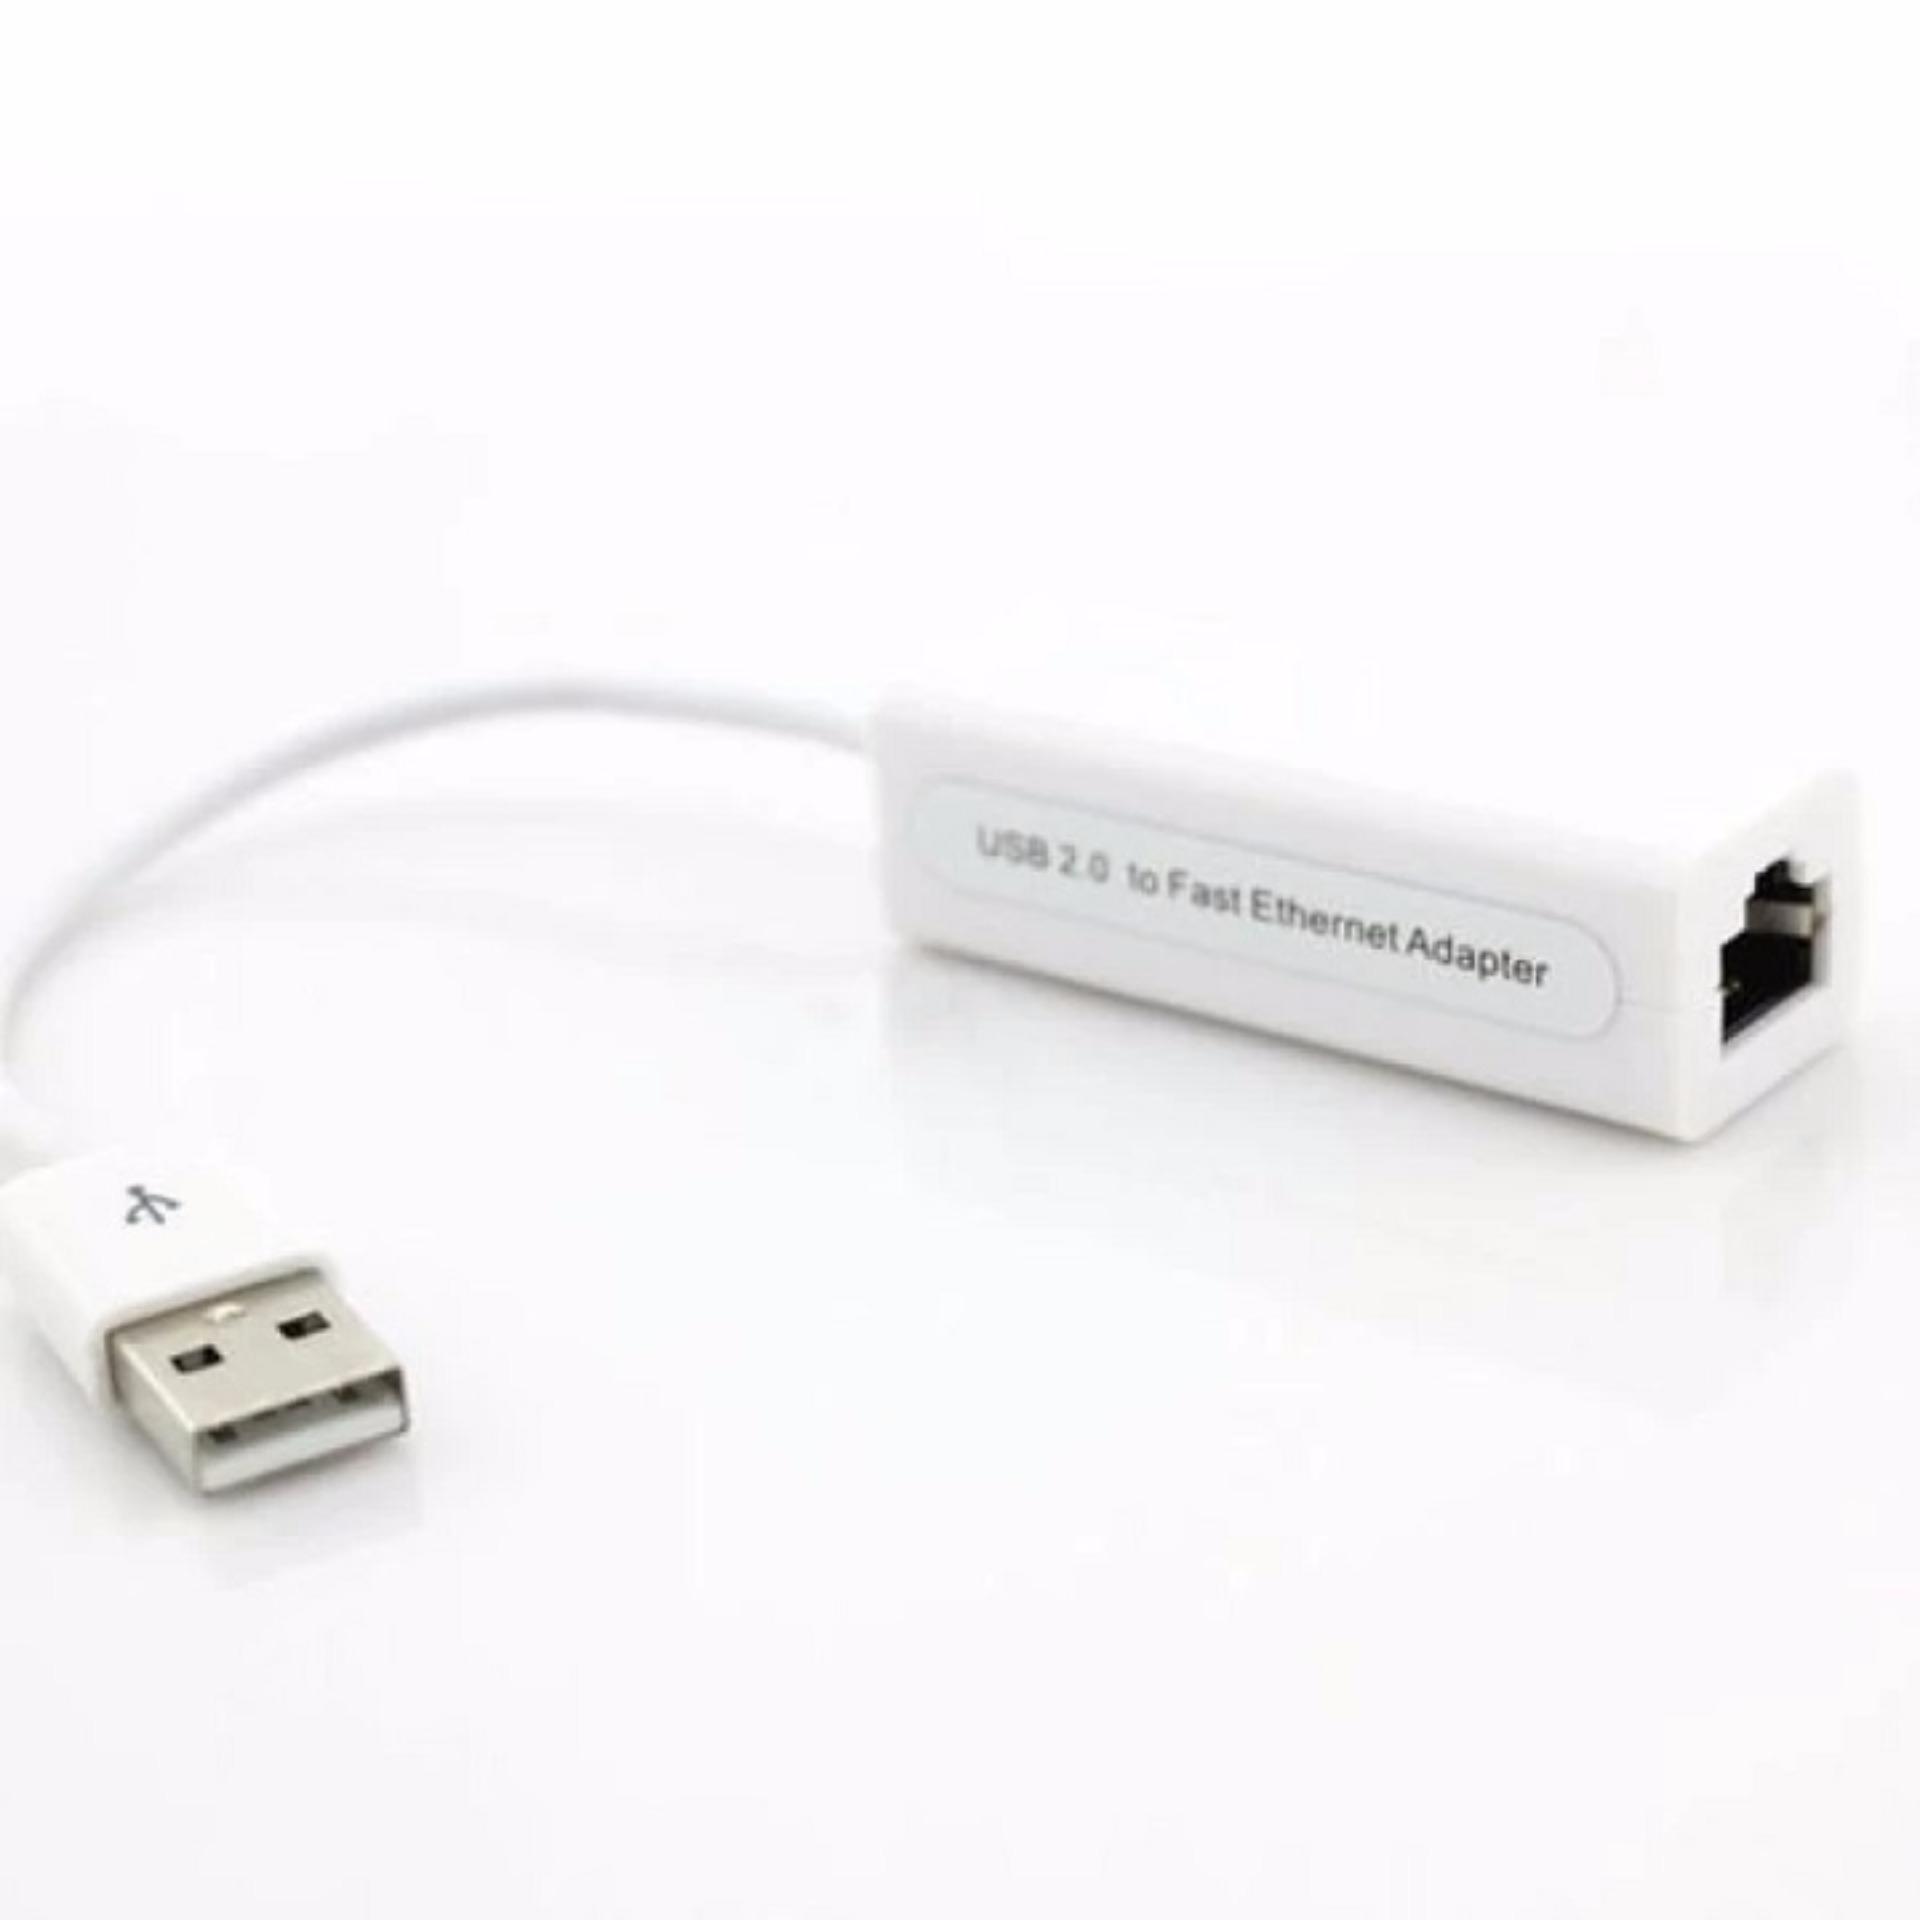 USB 2.0 to fast Ethernet 10/100 RJ45 Network LAN Adapter Card White NEW - Intl